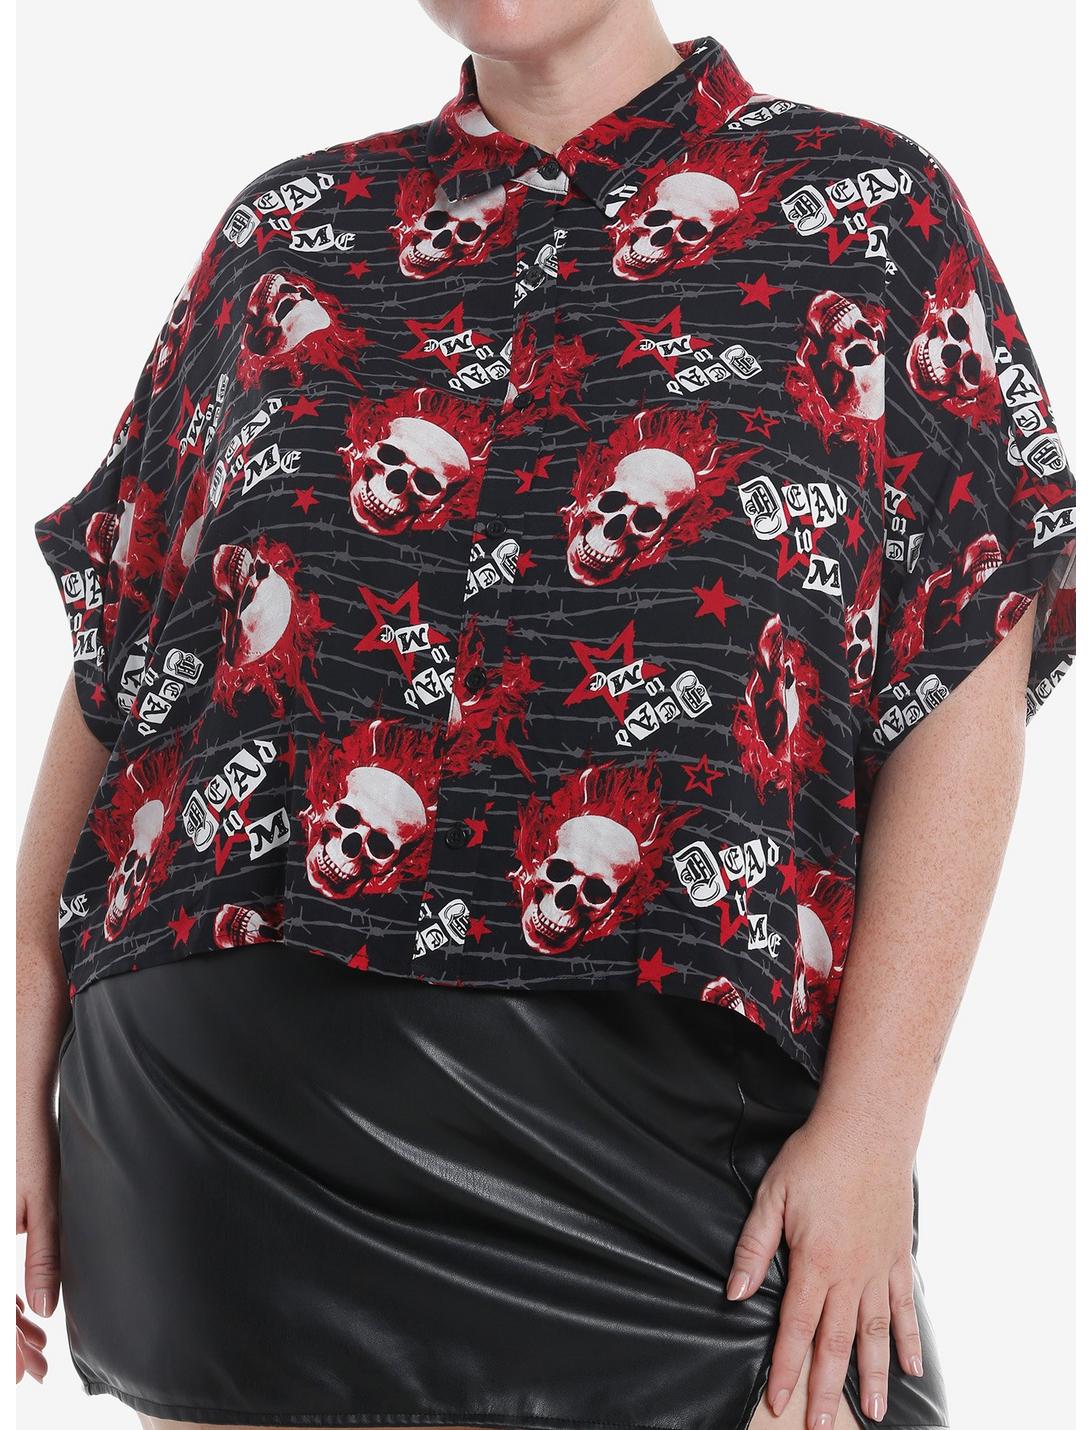 Social Collision Flaming Skulls Allover Print Girls Woven Button-Up Plus Size, RED, hi-res